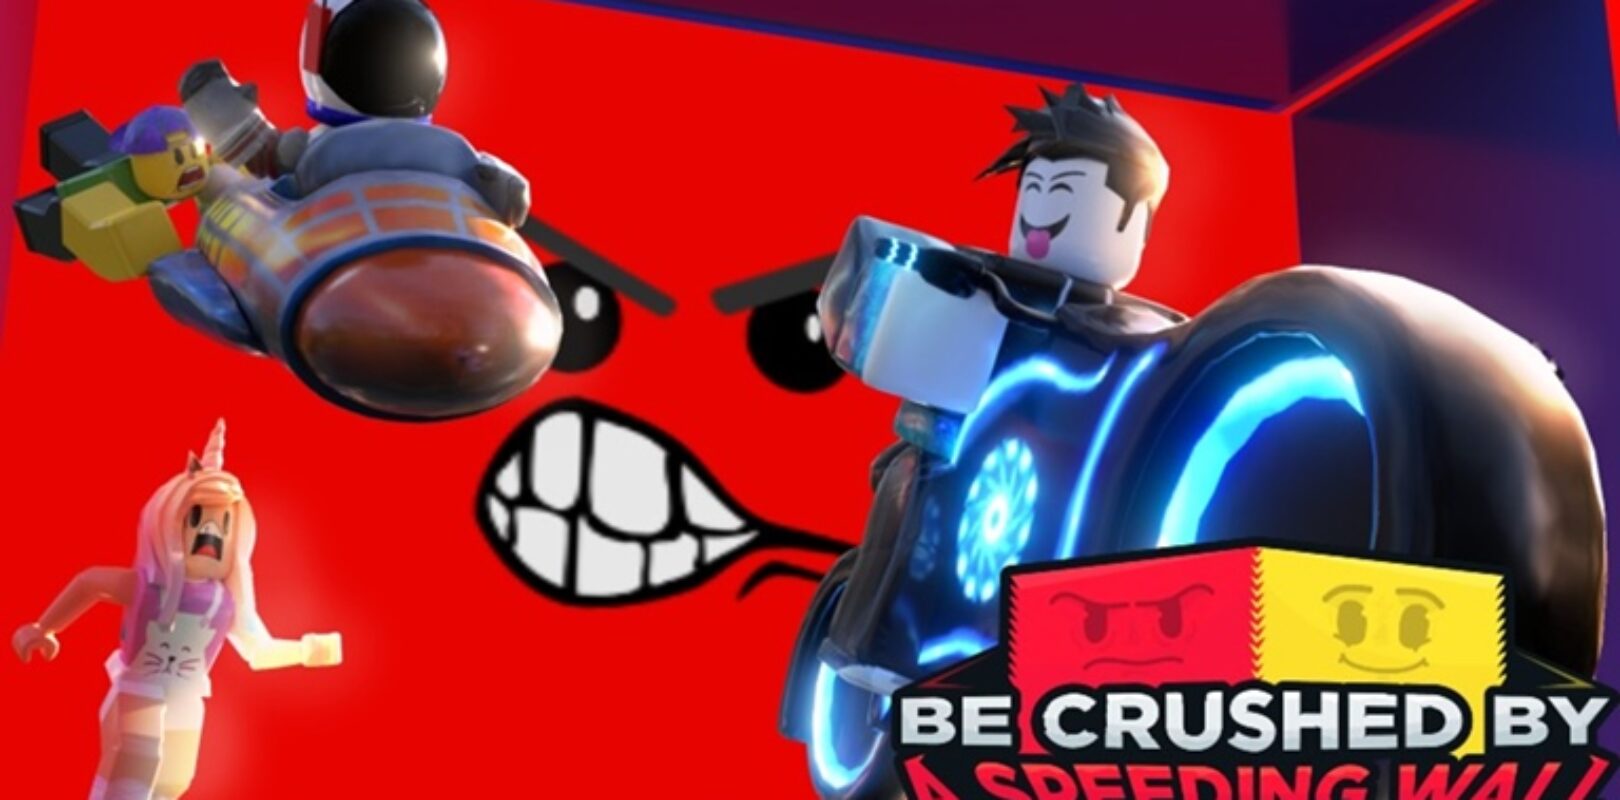 Be Crushed By A Speeding Wall Codes 2020 Pivotal Gamers - crushed by a speeding wall roblox codes